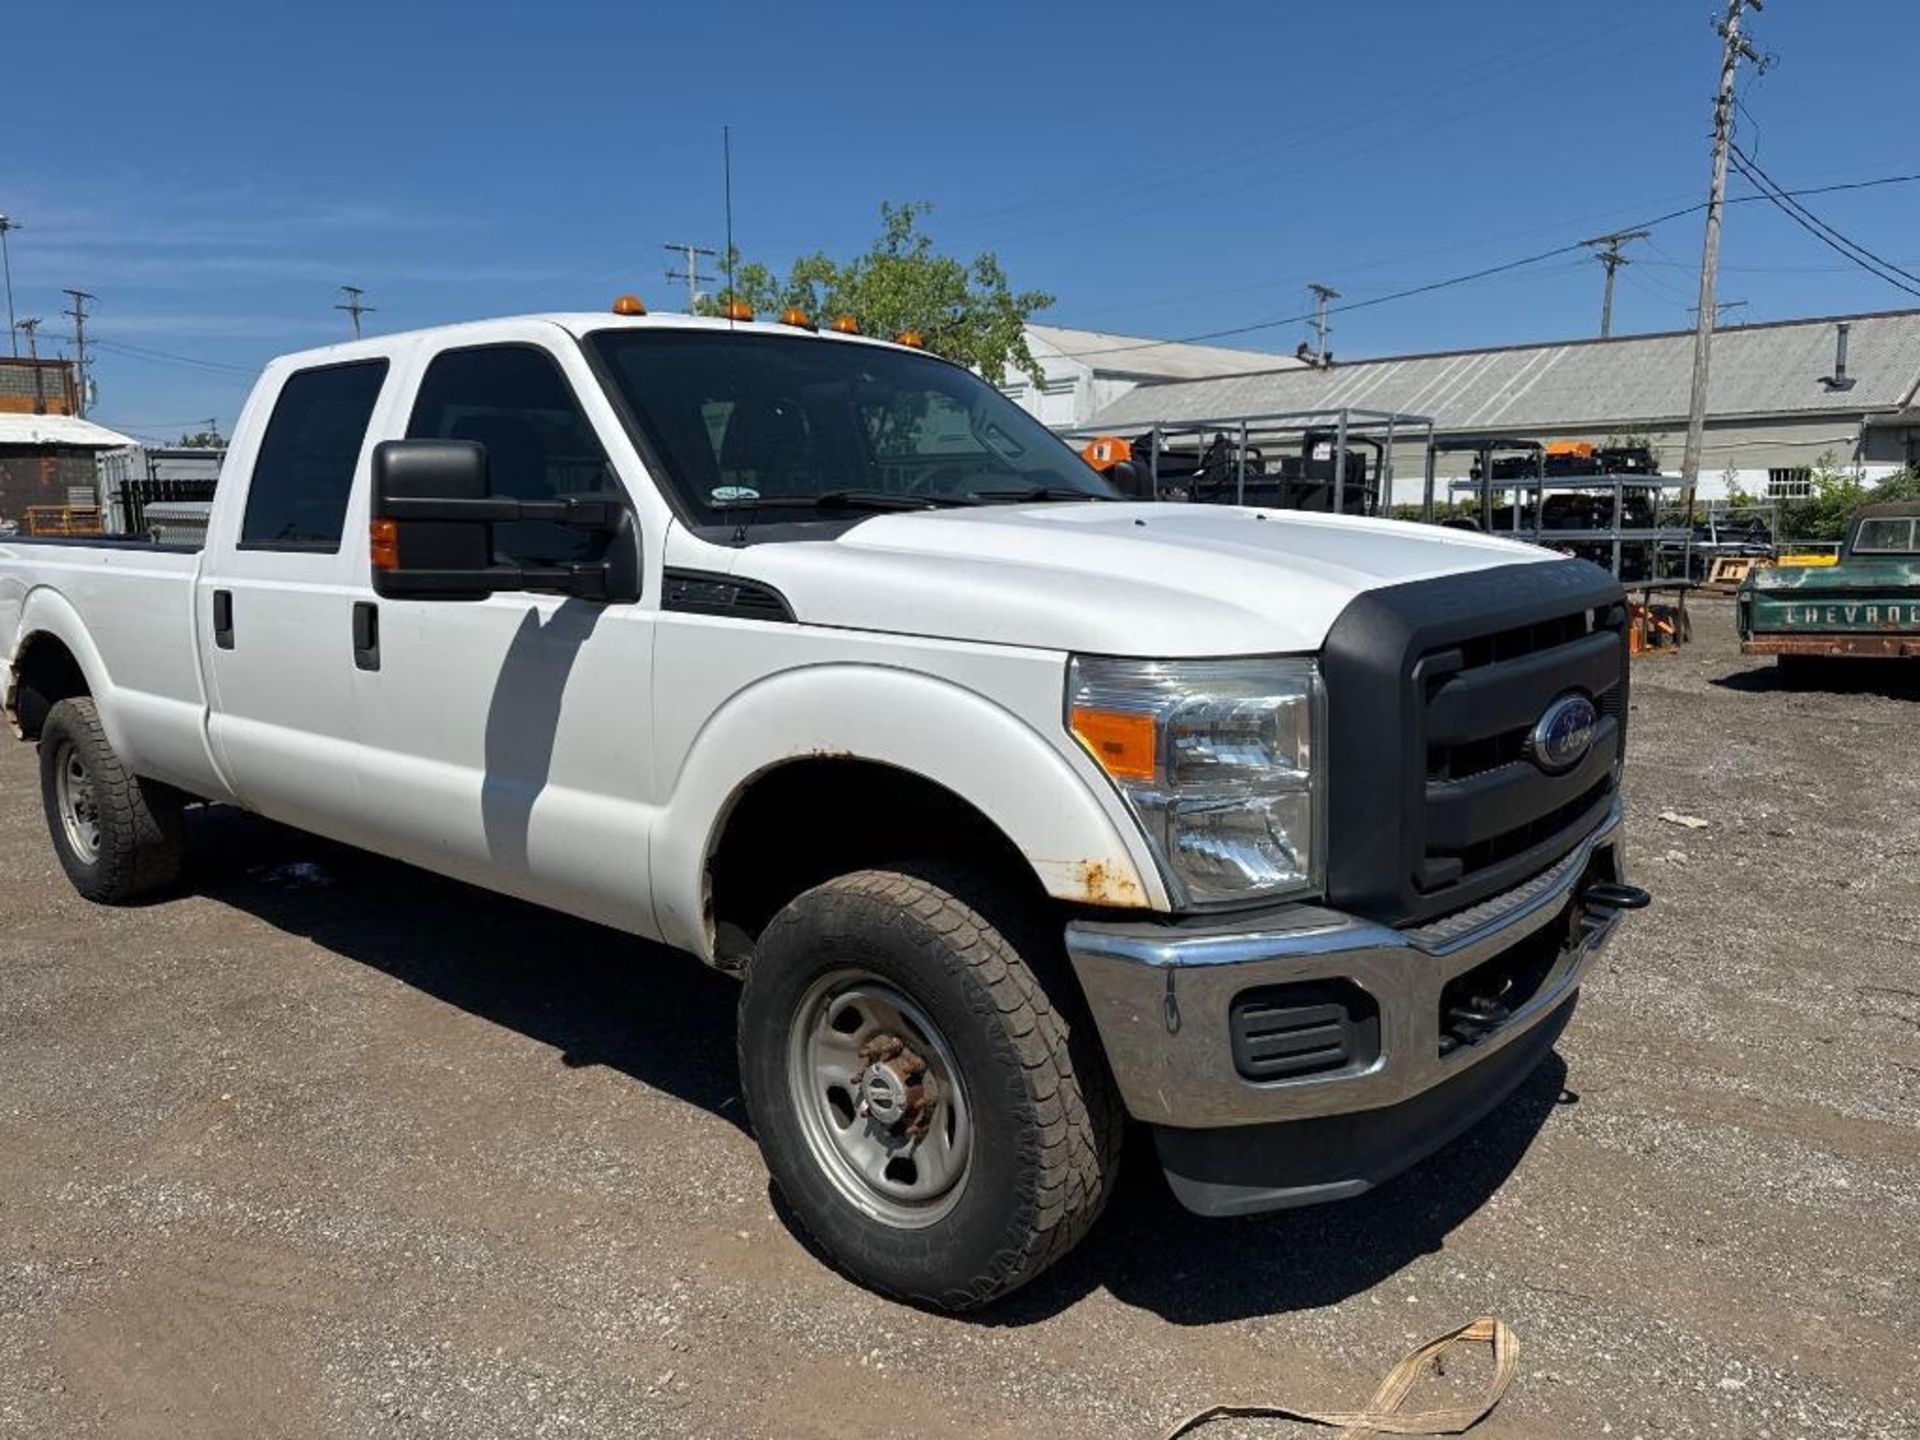 2012 Ford F-350 4x4 King Ranch Pickup Truck - Image 3 of 13